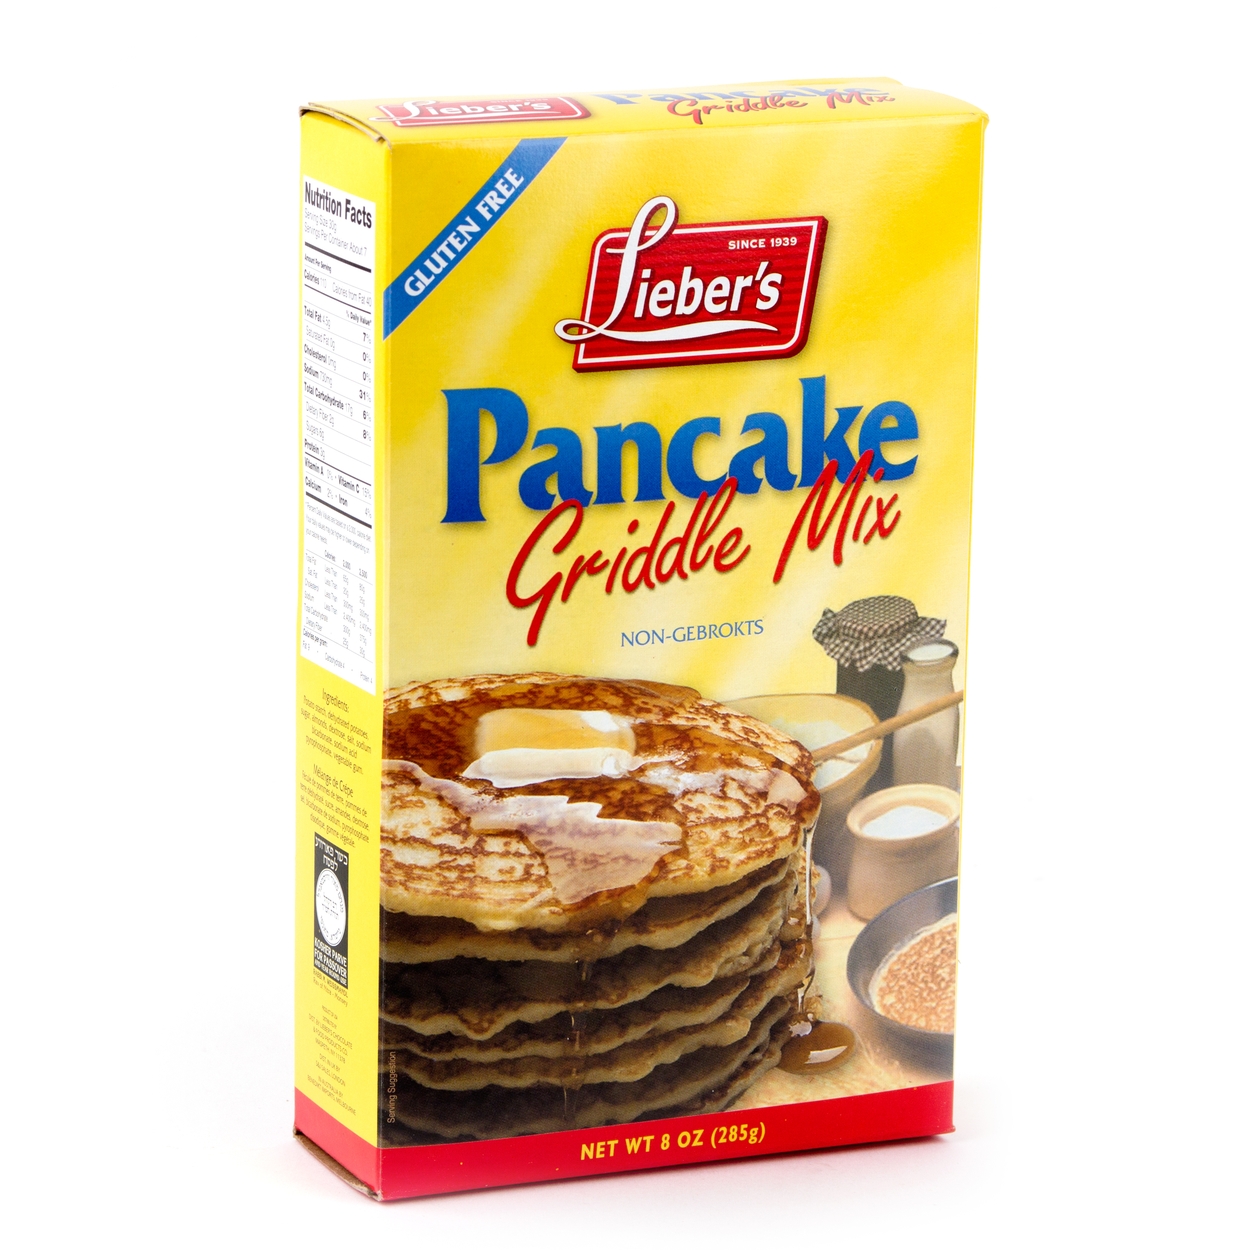 Gluten-Free Pancake Griddle Mix - 8 OZ Box • Passover Food Specialties,  Cooking & Baking • Passover Gift Baskets - Candy Chocolate & Nuts • Oh!  Nuts®